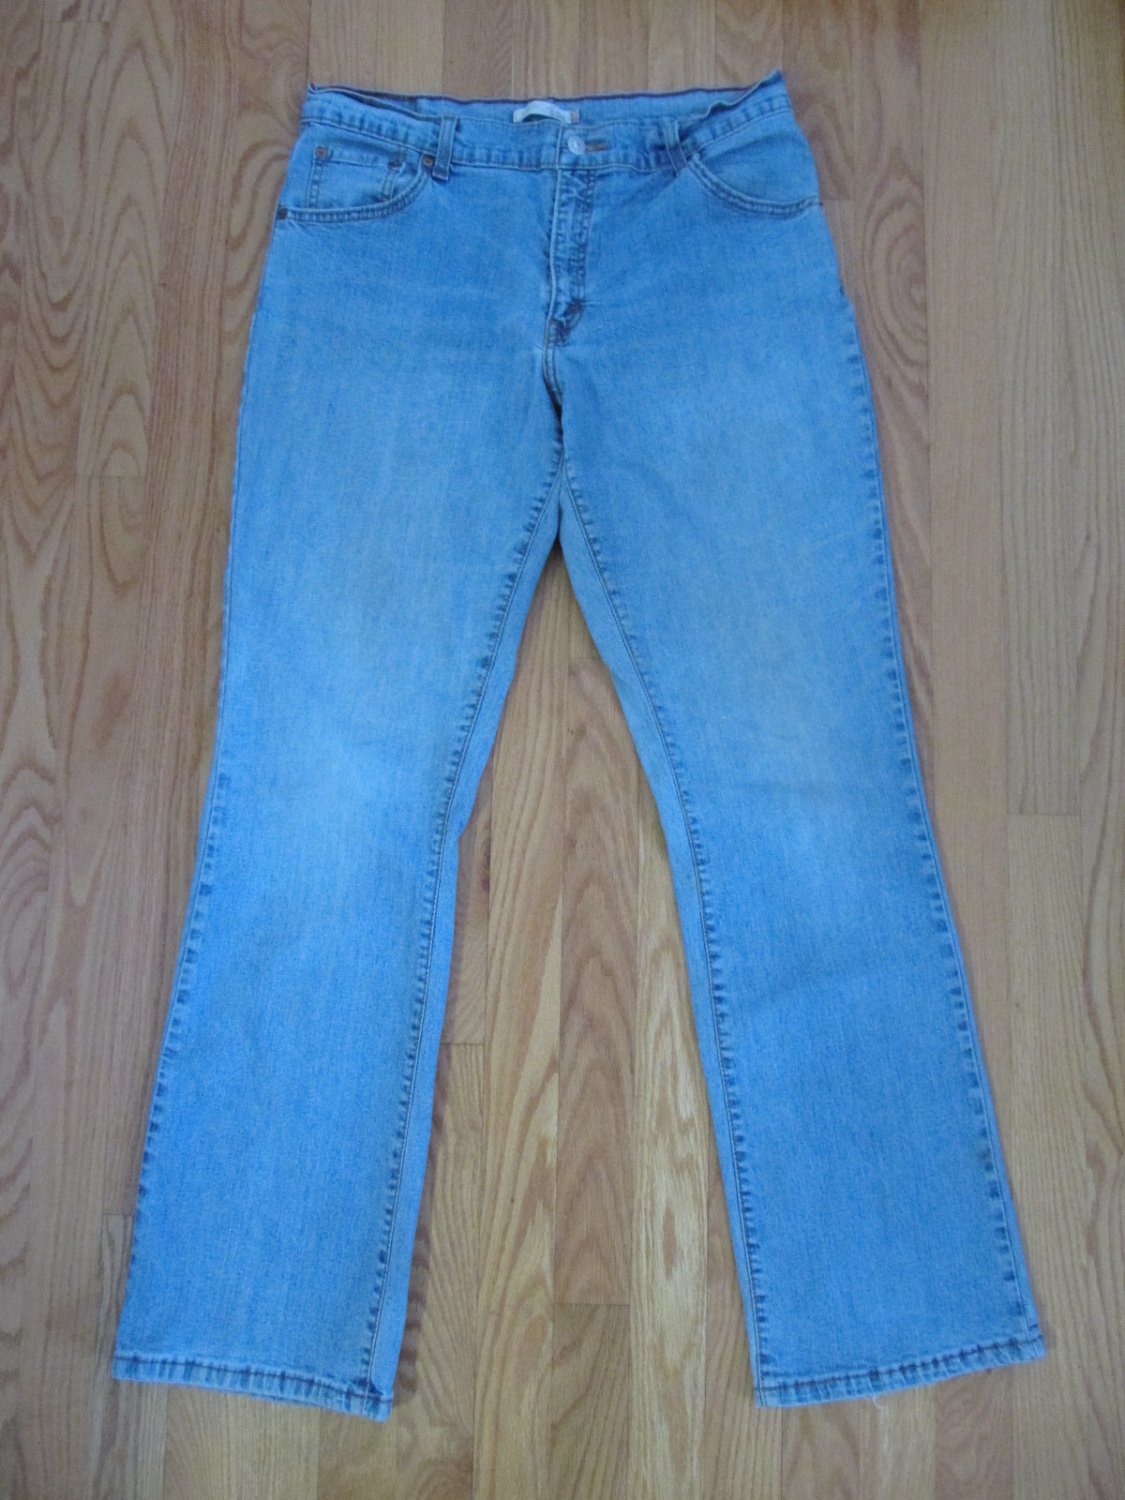 LEVI'S 550 WOMEN'S SIZE 12 M JEANS MED STRETCH DENIM RELAXED BOOT CUT ...